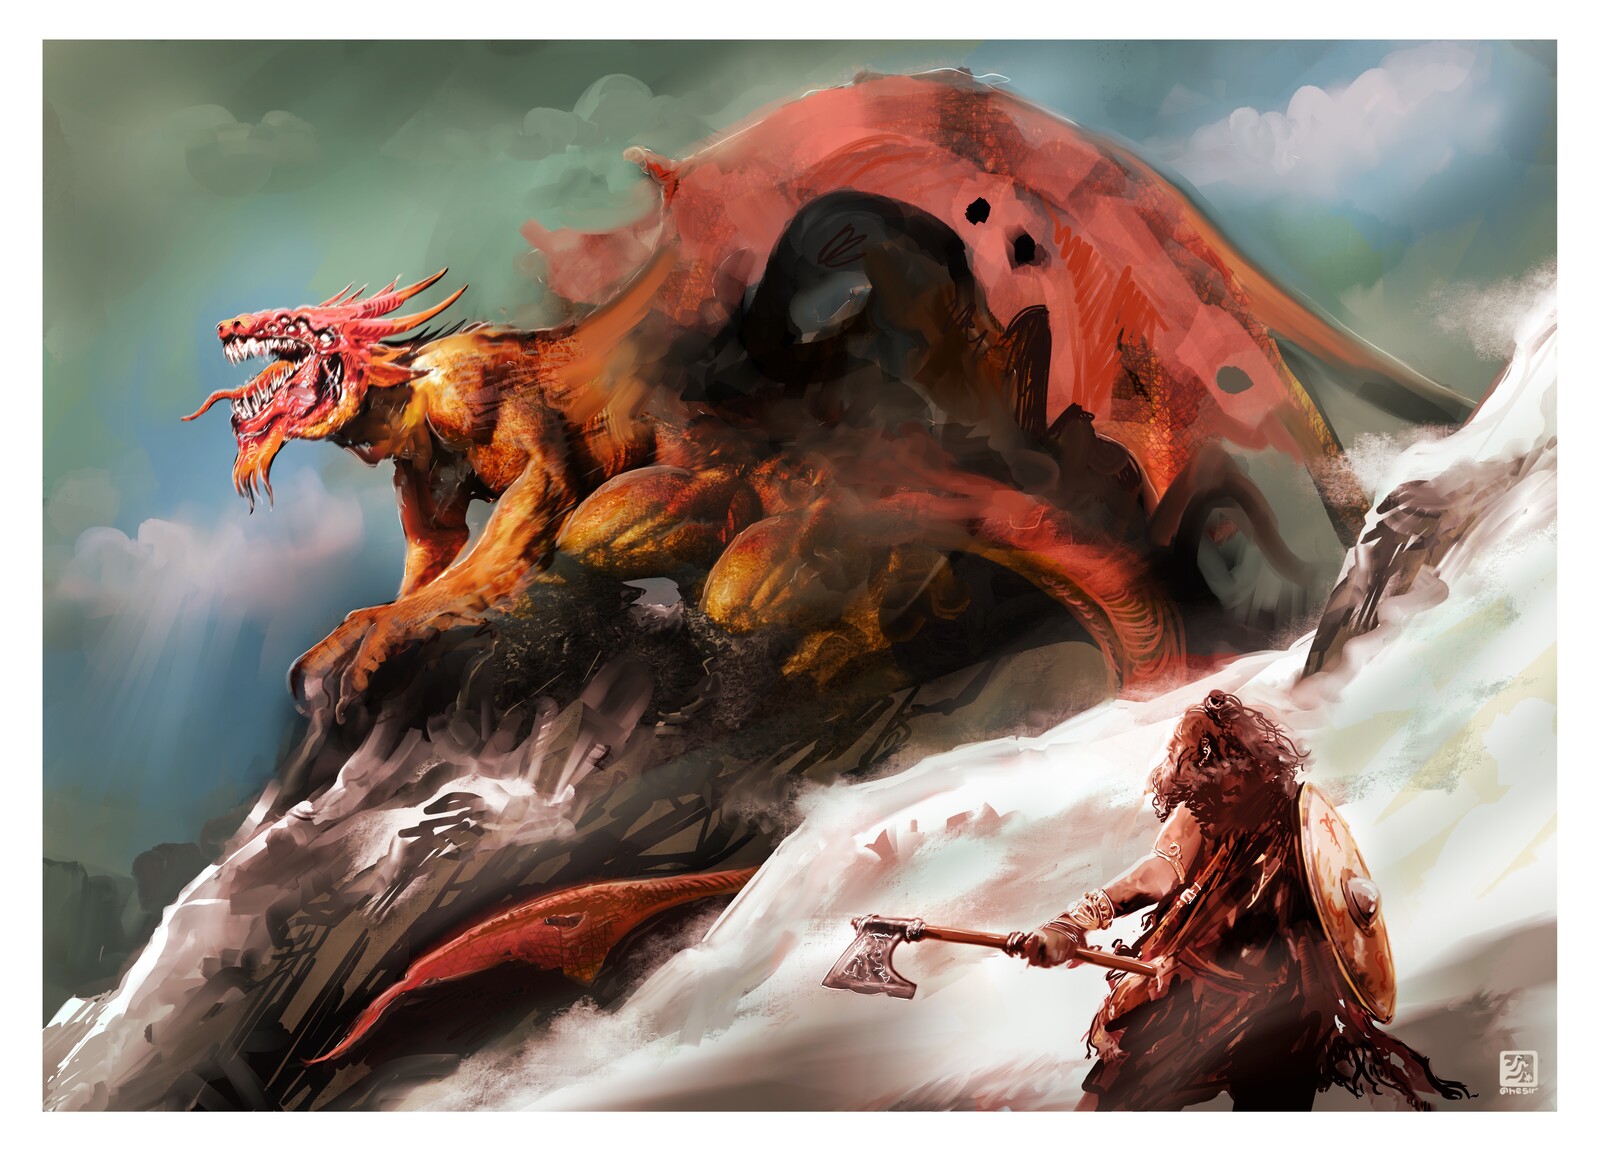 Dragon Slayer - partial photobash, see video below for process.